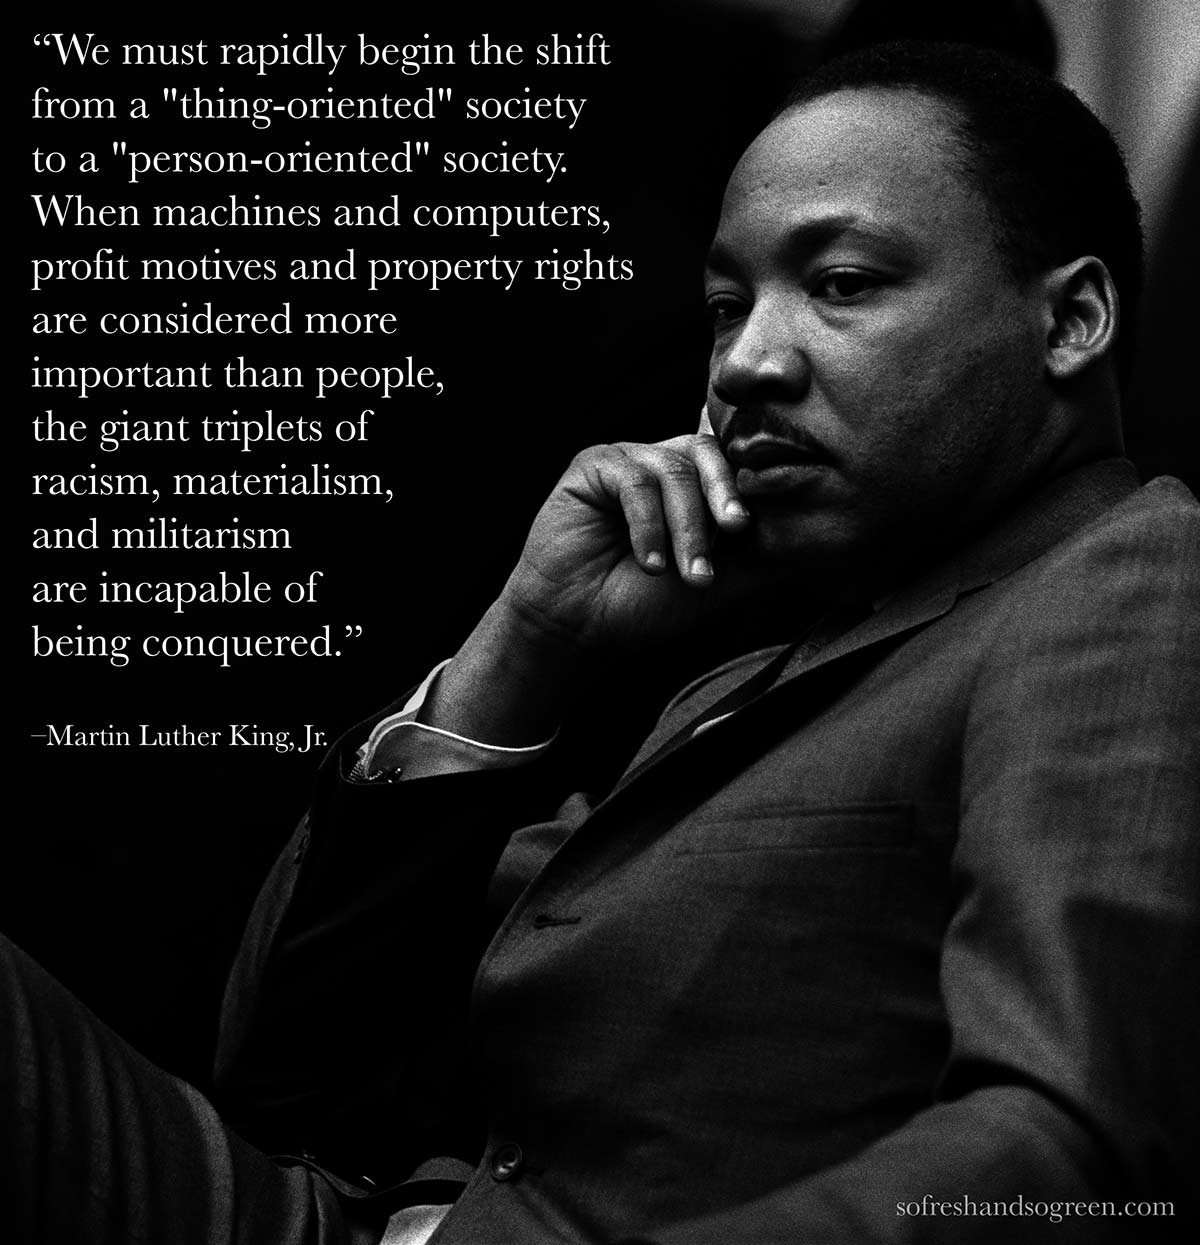 We must rapidly begin the shift from a 'thing-oriented' society to a 'person-oriented' society. When machines and computers, profit motives and property rights ... Martin Luther King Jr.